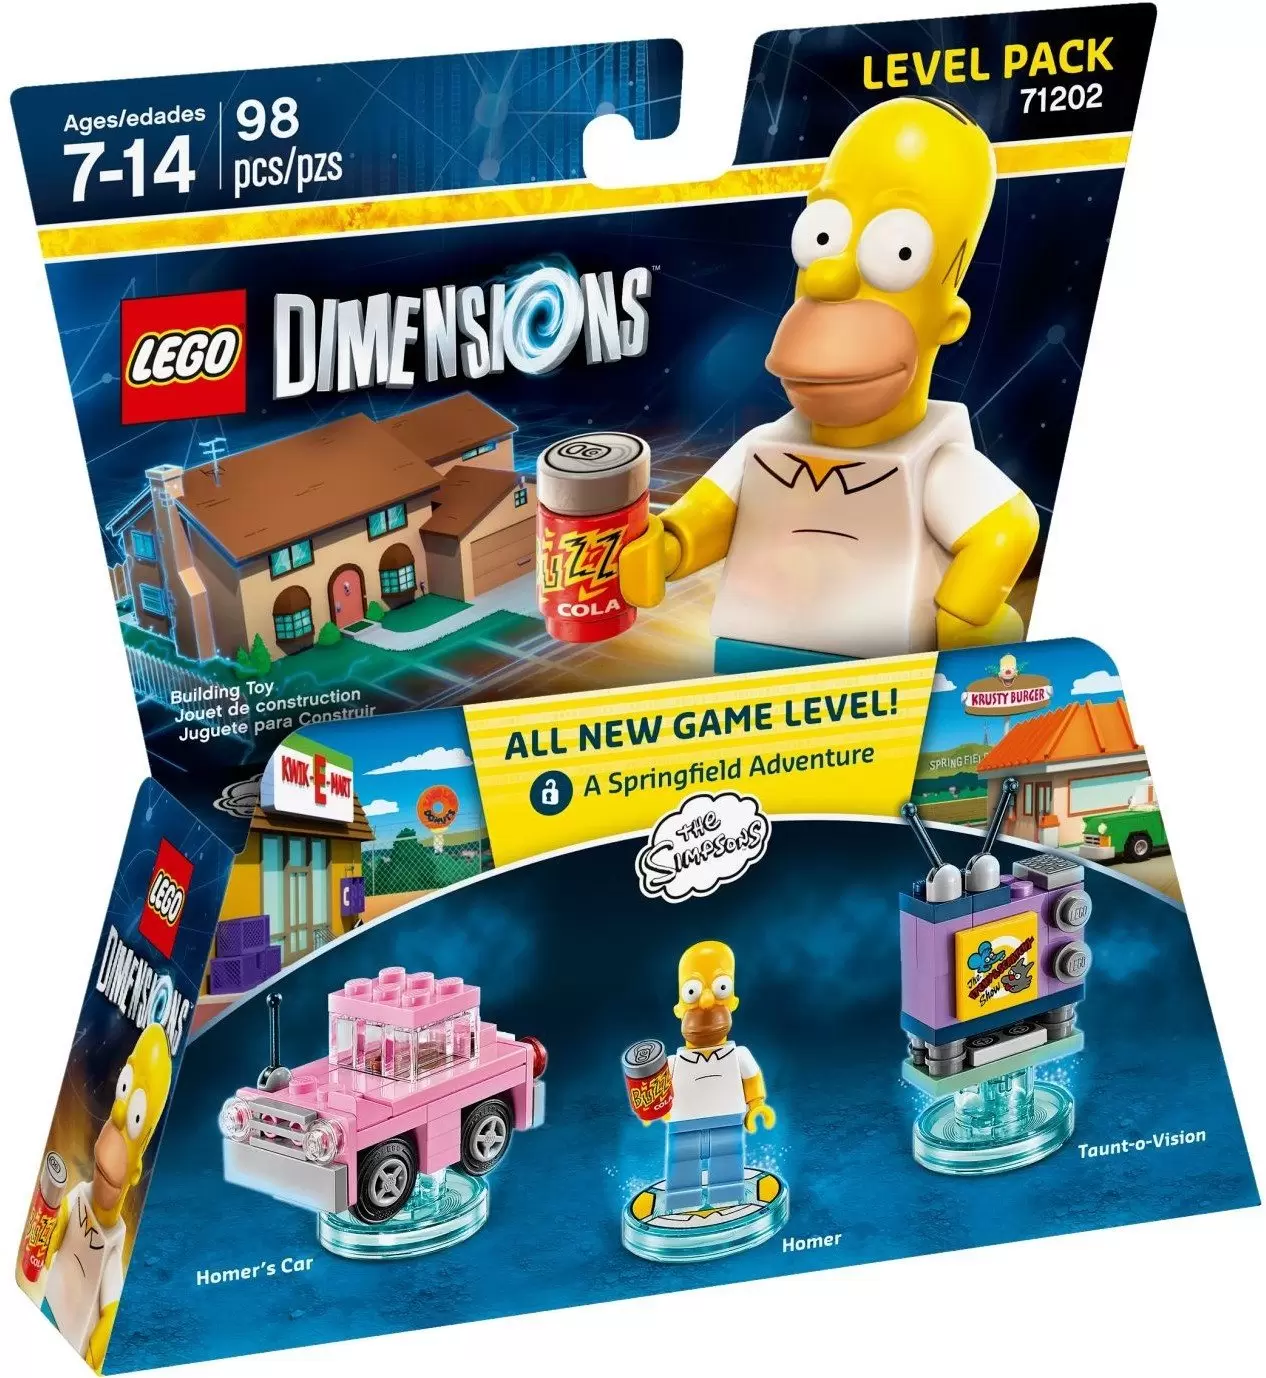 LEGO Dimensions - The Simpsons Level Pack